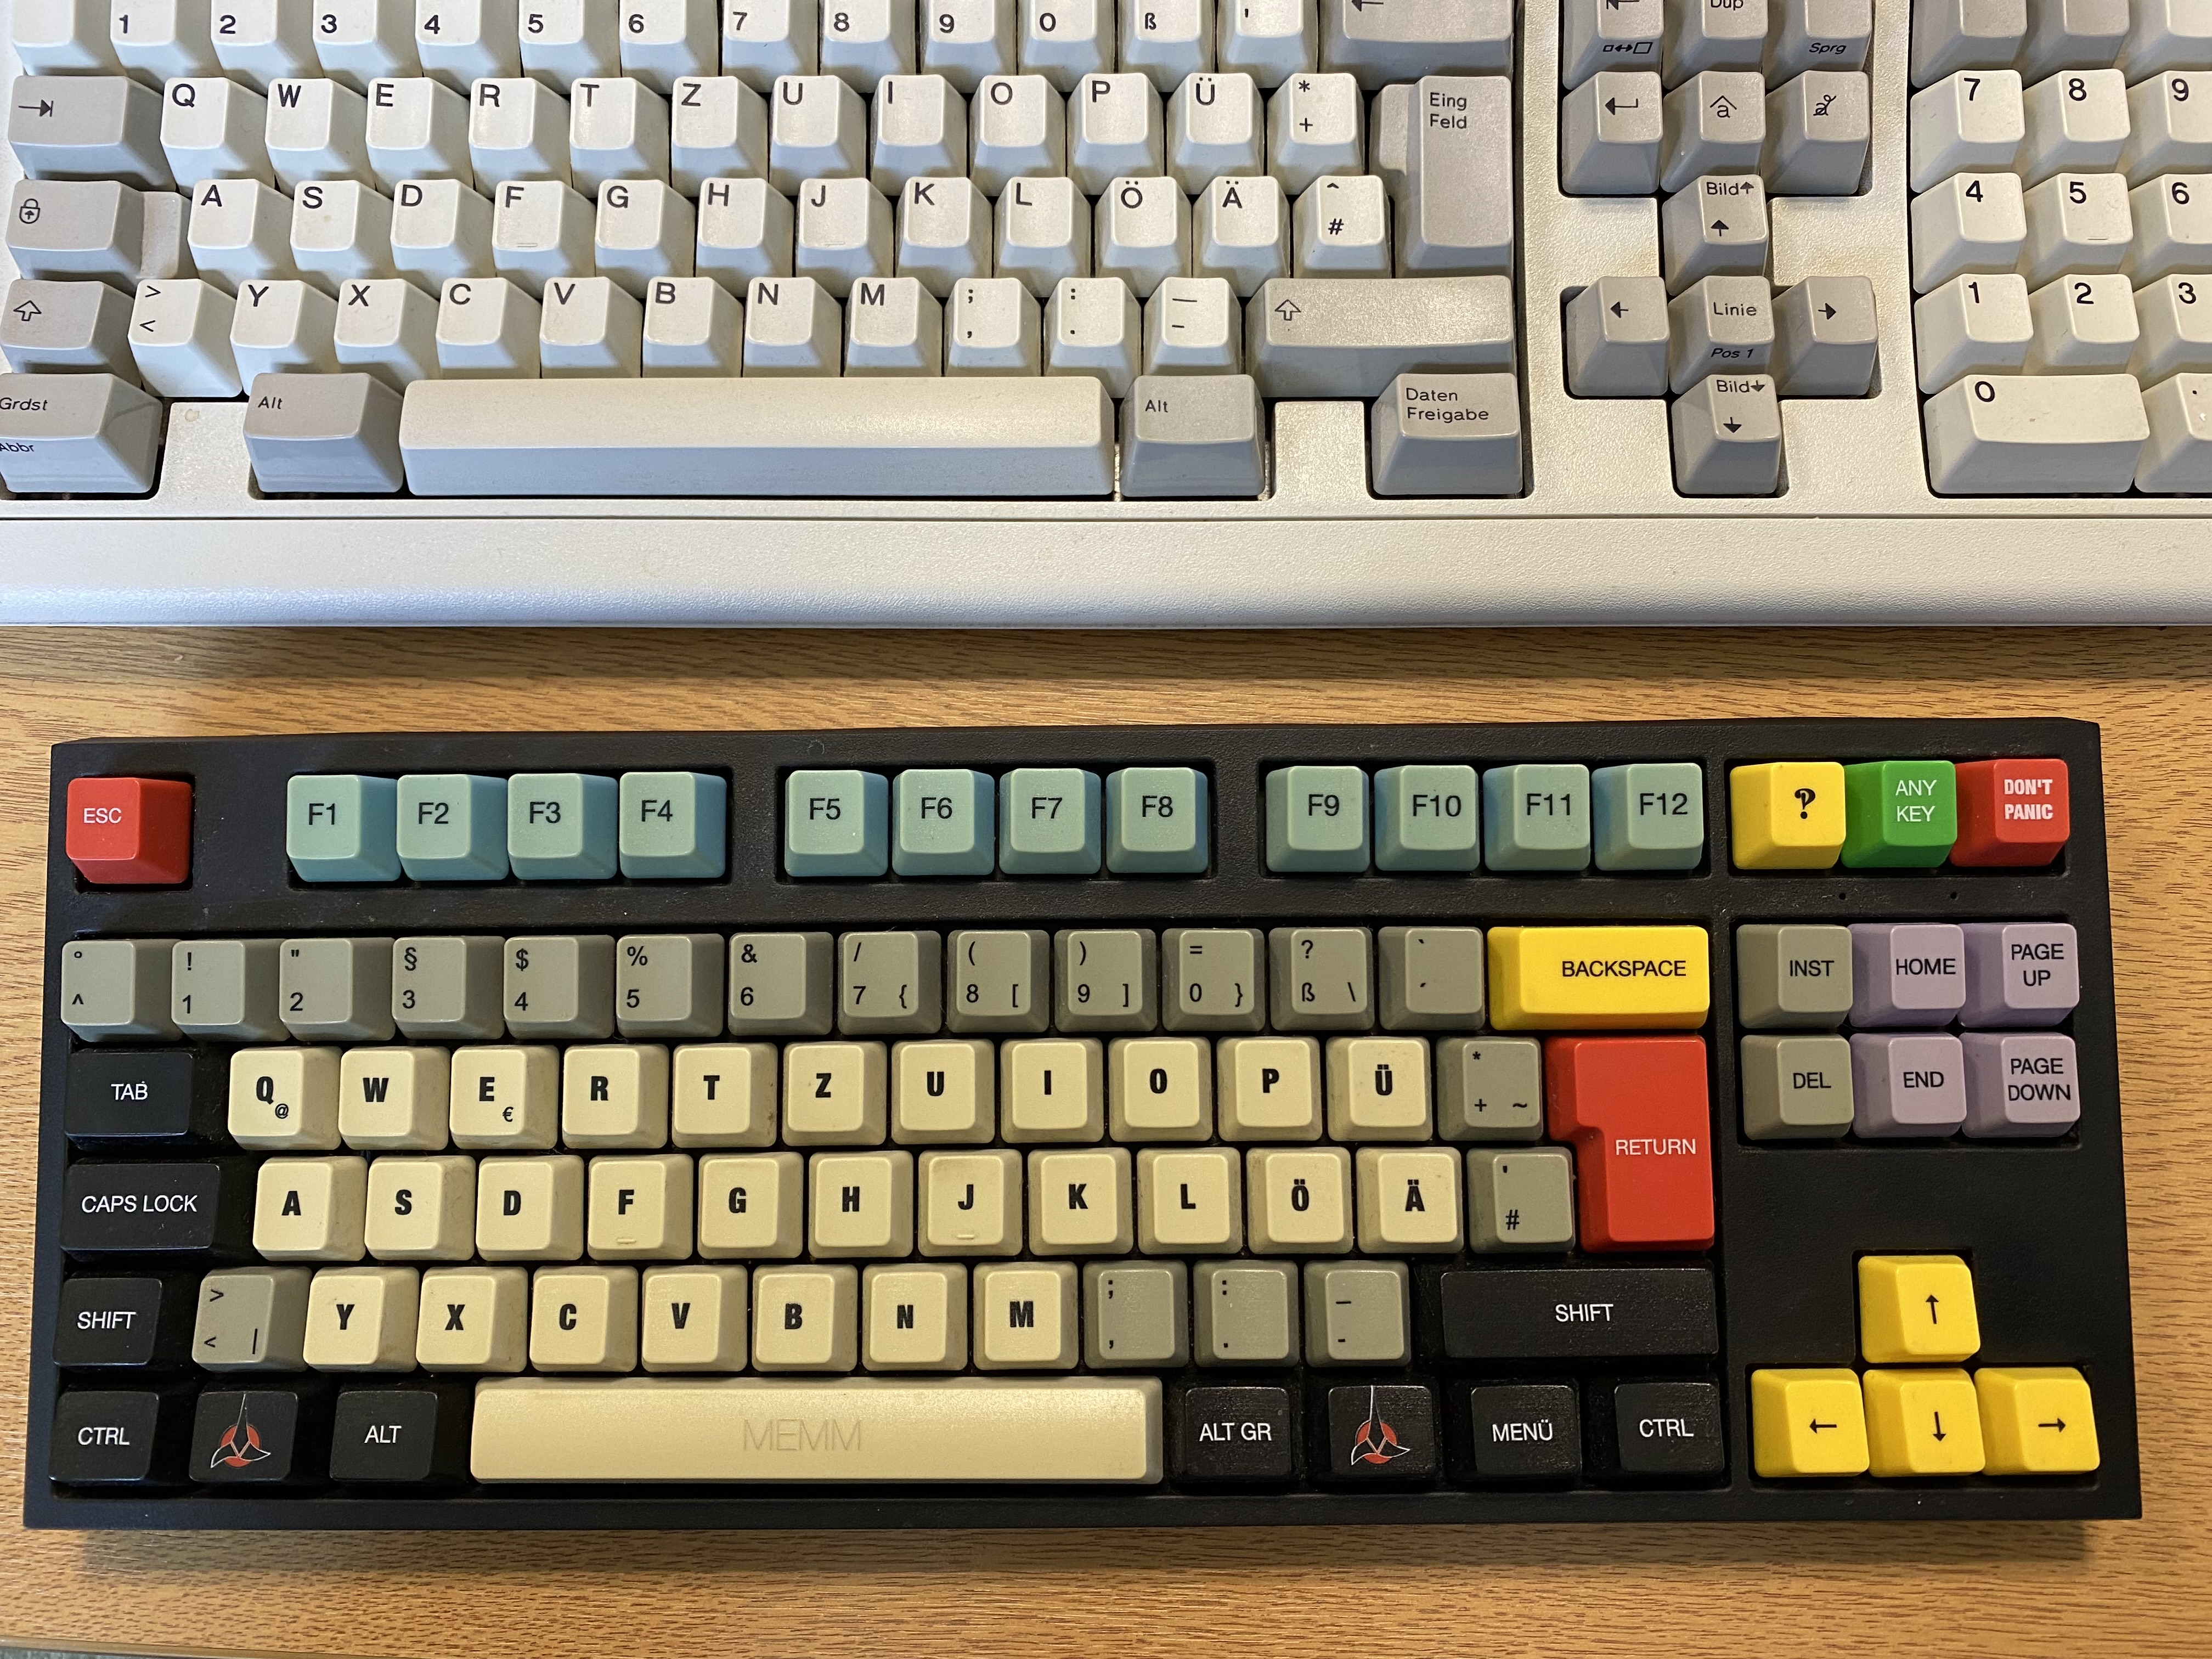 compare the yellowness to the Model M